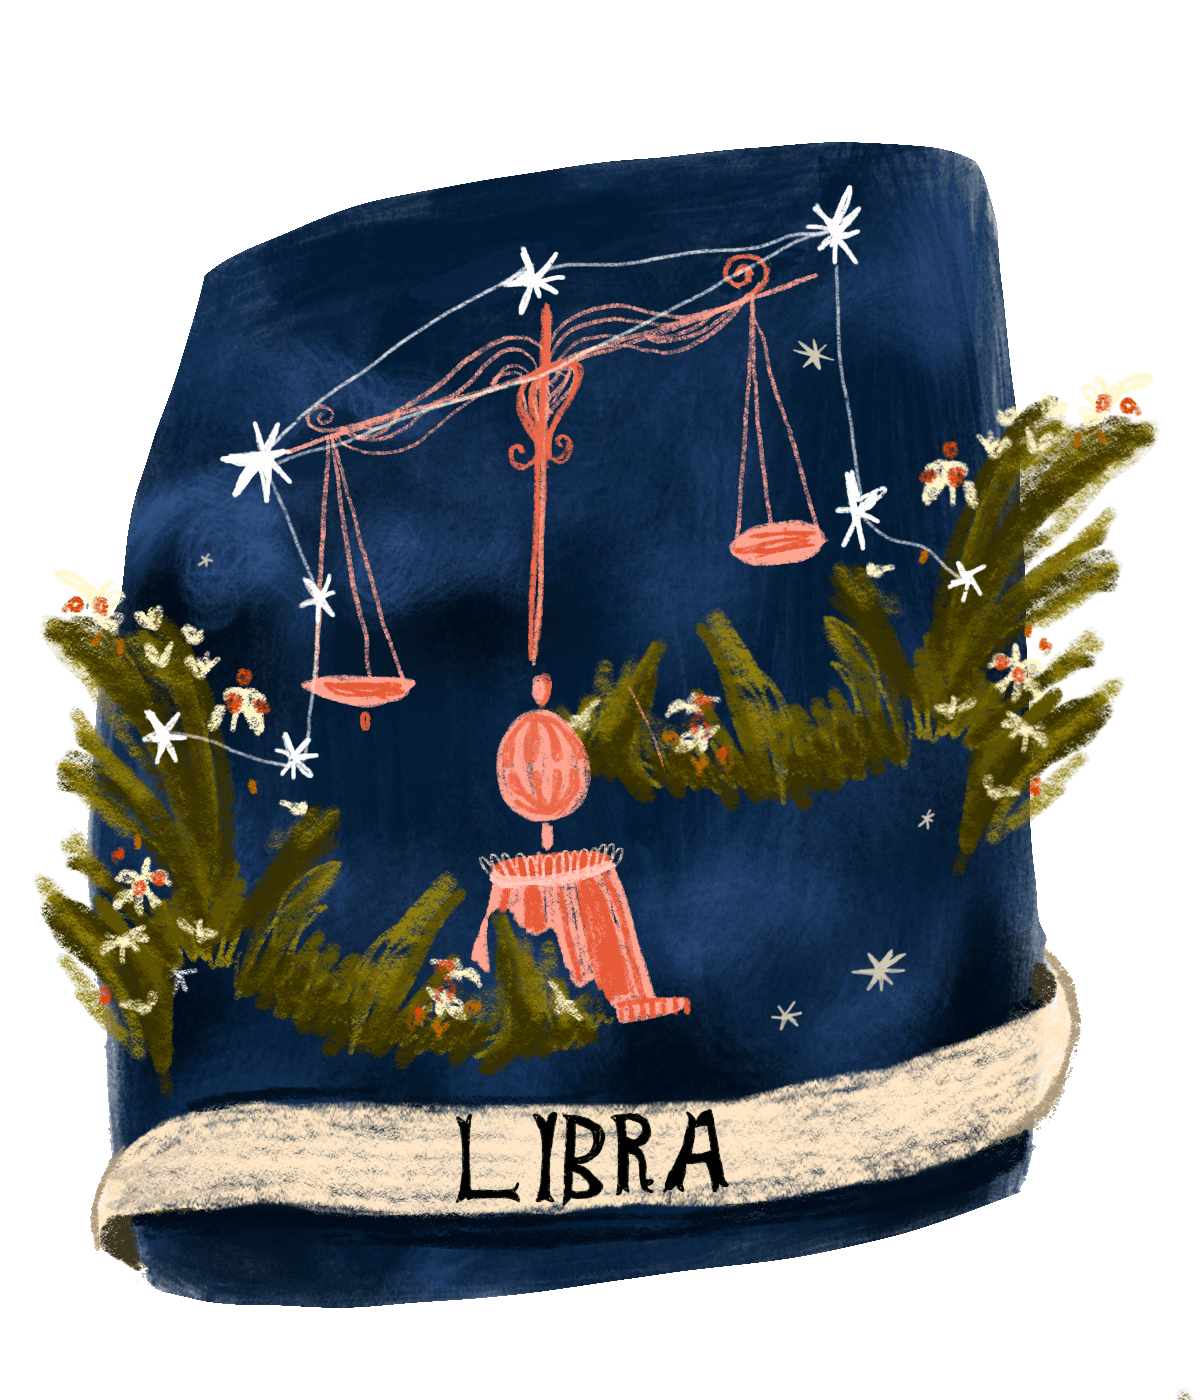 An illustration of the Libra star sign.